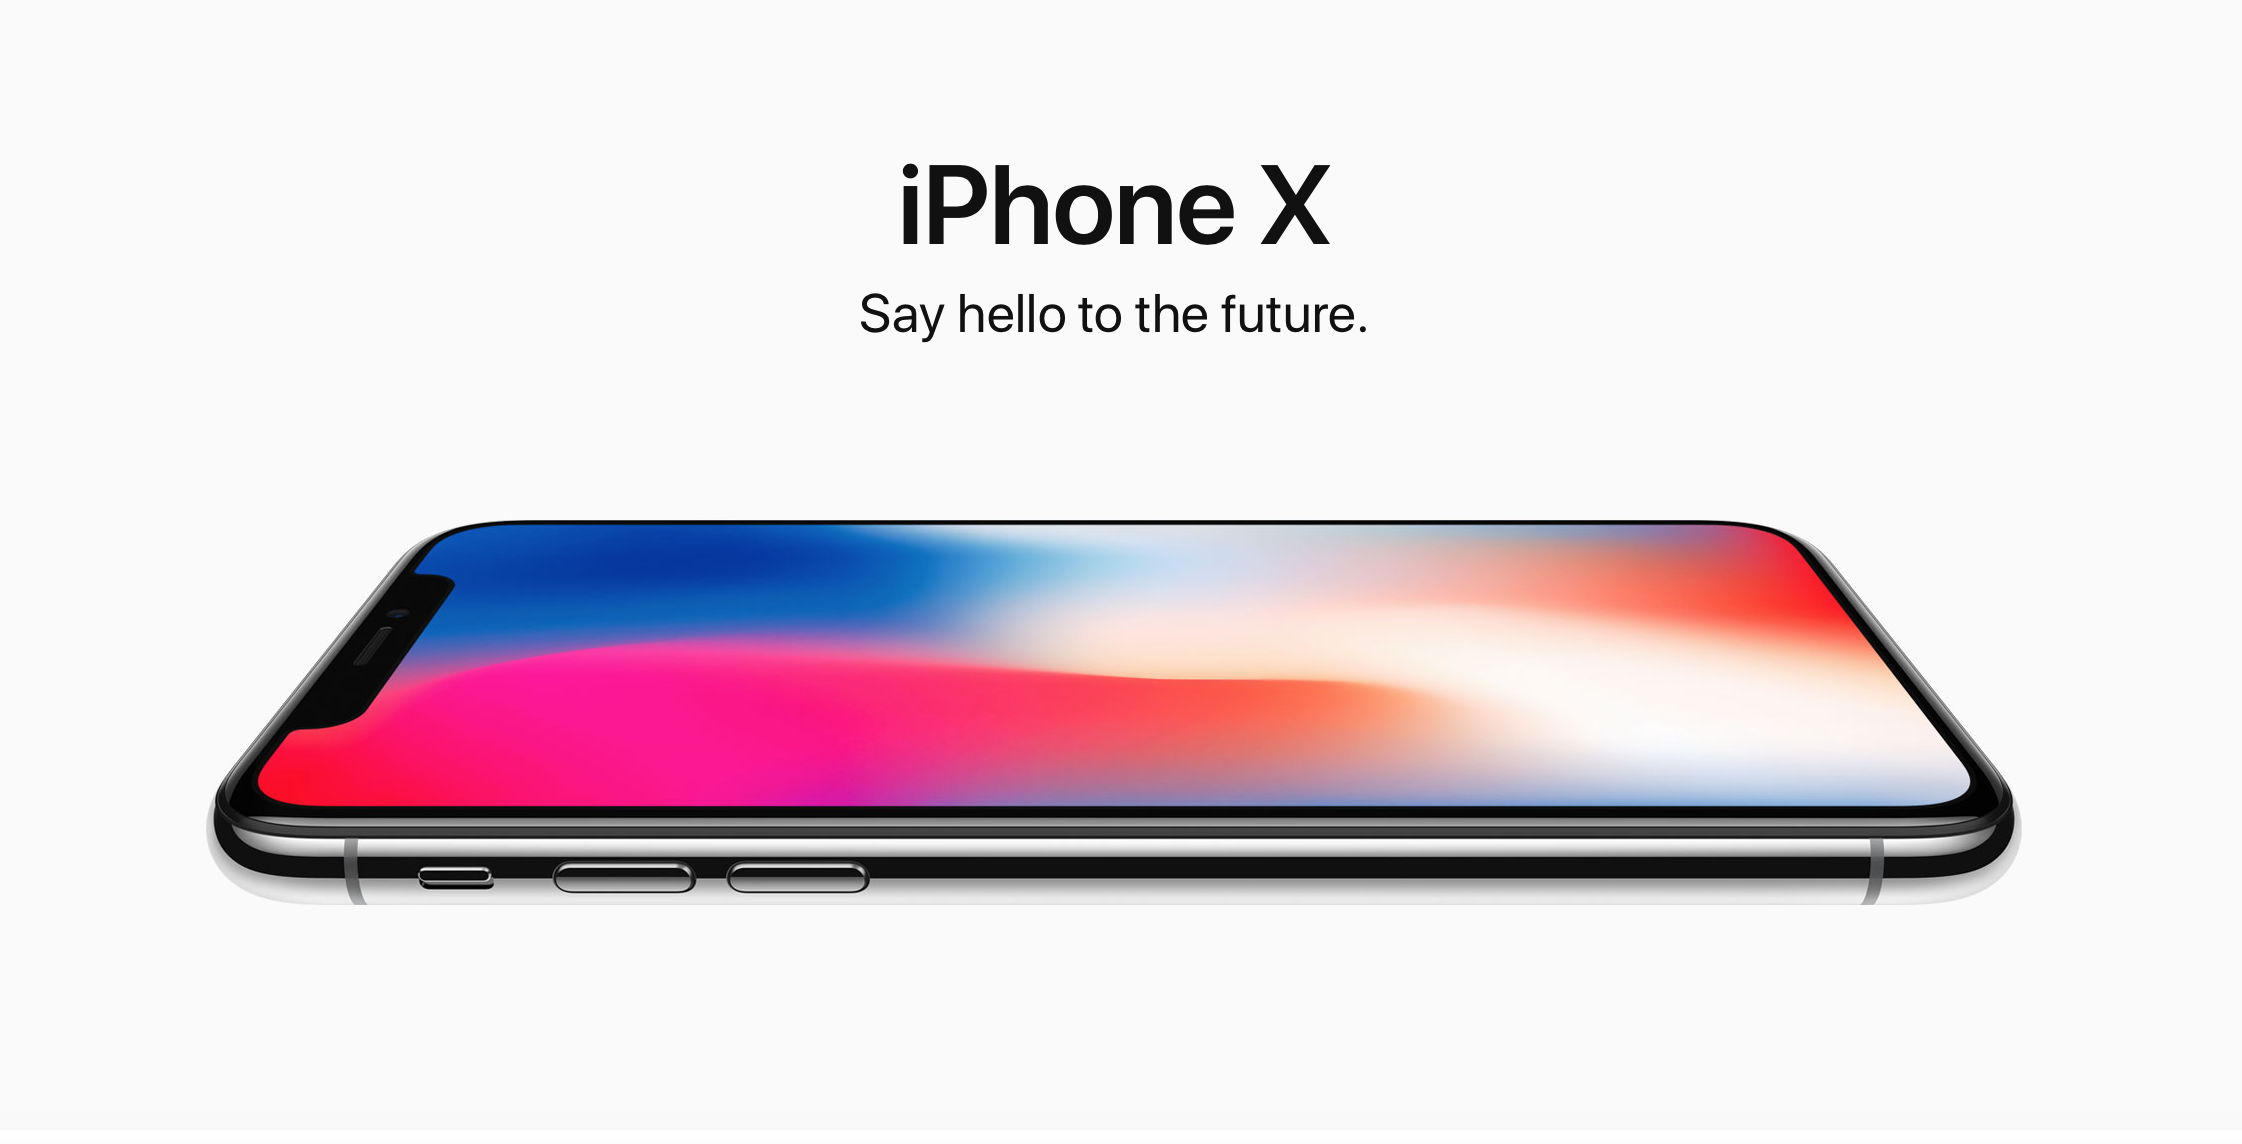 http://thedigitalstory.com/iphone-x-apple-promo.png